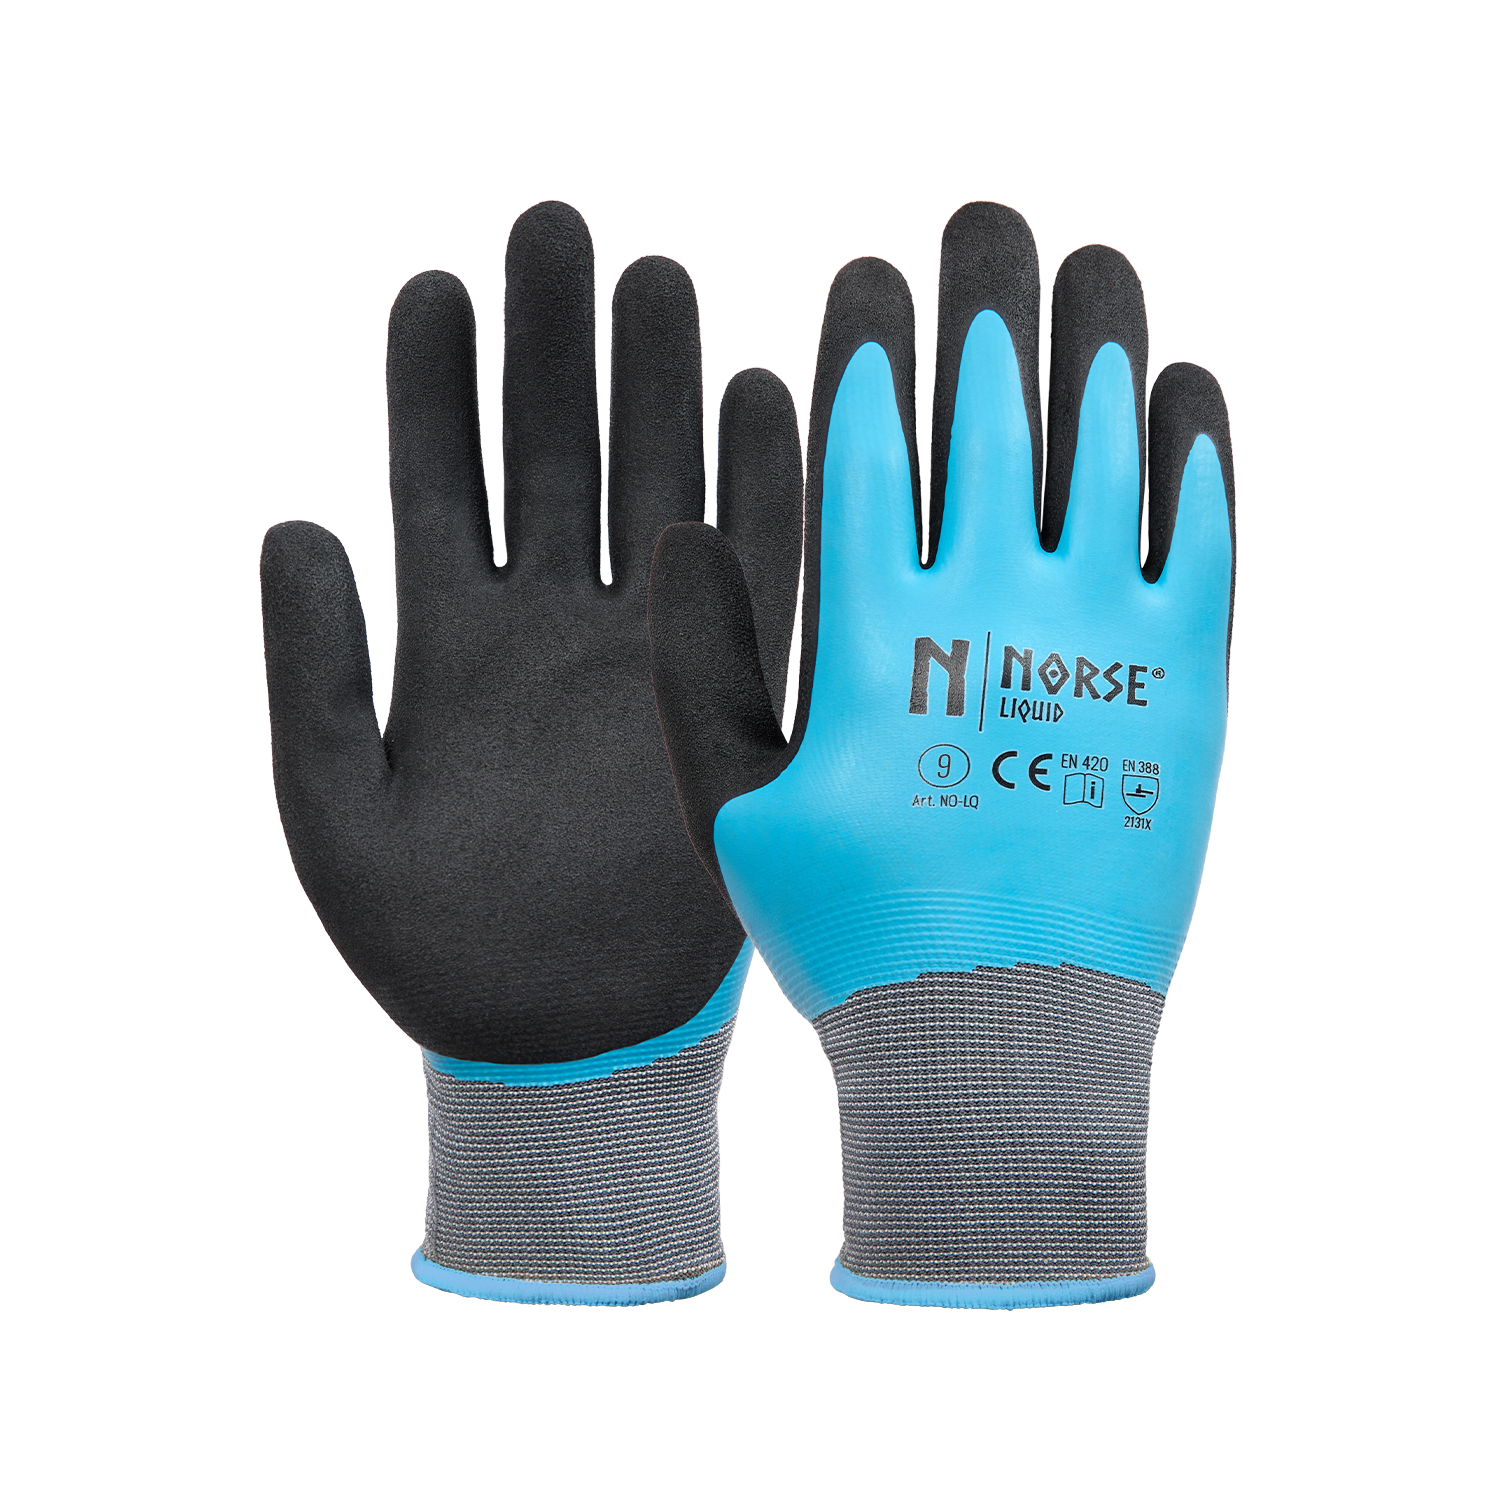 NORSE Liquid Waterproof assembly gloves size 11